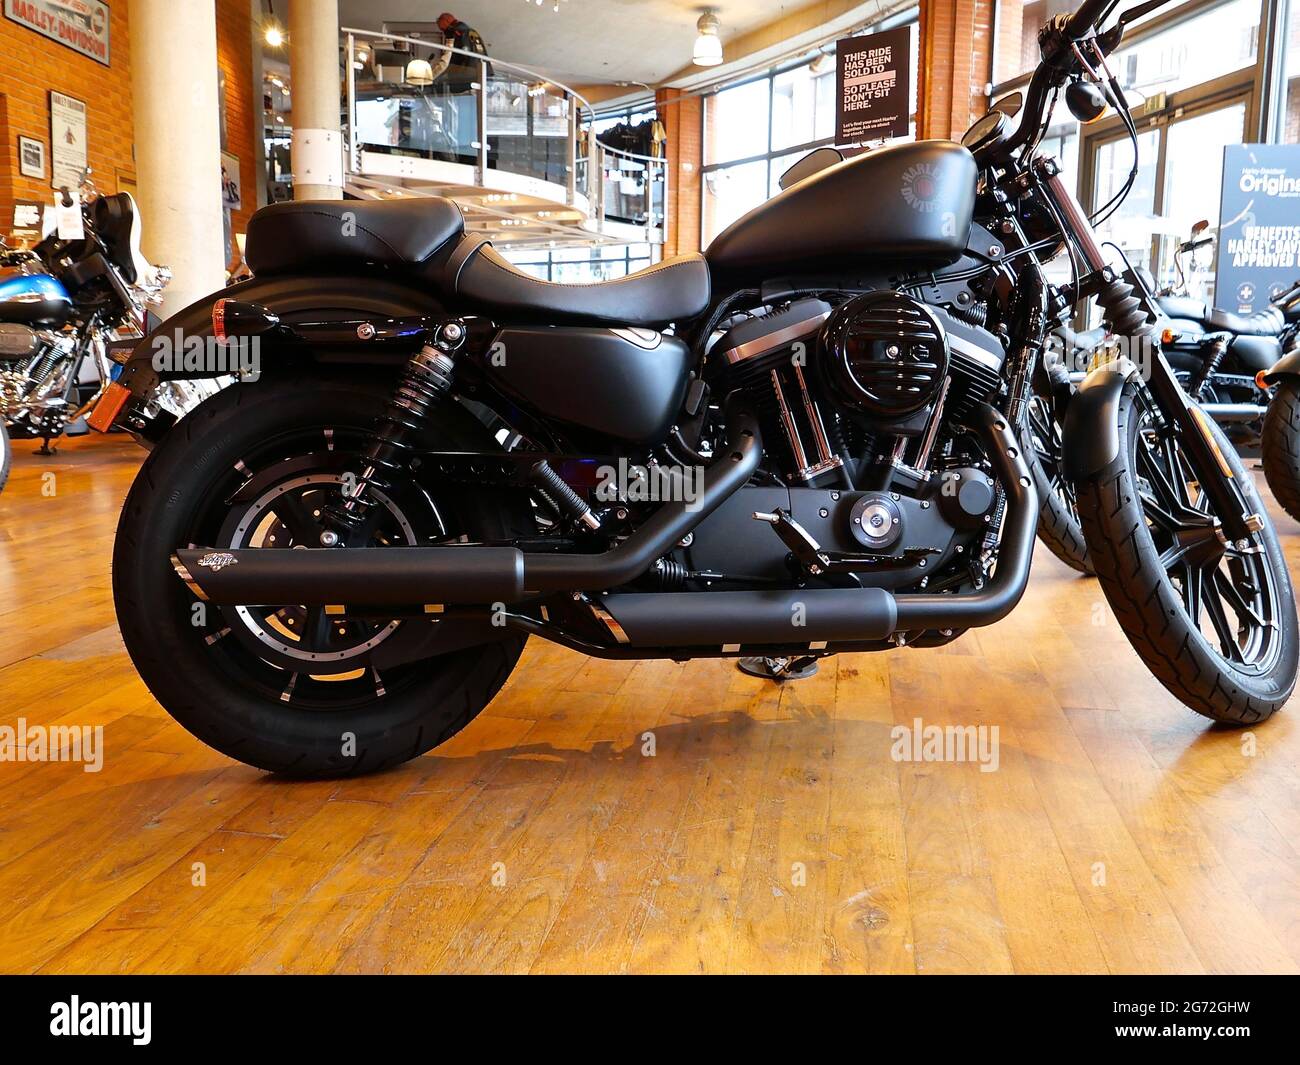 Entreprenør kultur vagt Warr's Harley-Davidson is Europe's oldest and biggest selling authorised  Harley dealership group with two award winning sites in London. Established  in 1924 our services including New and Used Sales, Service, and a